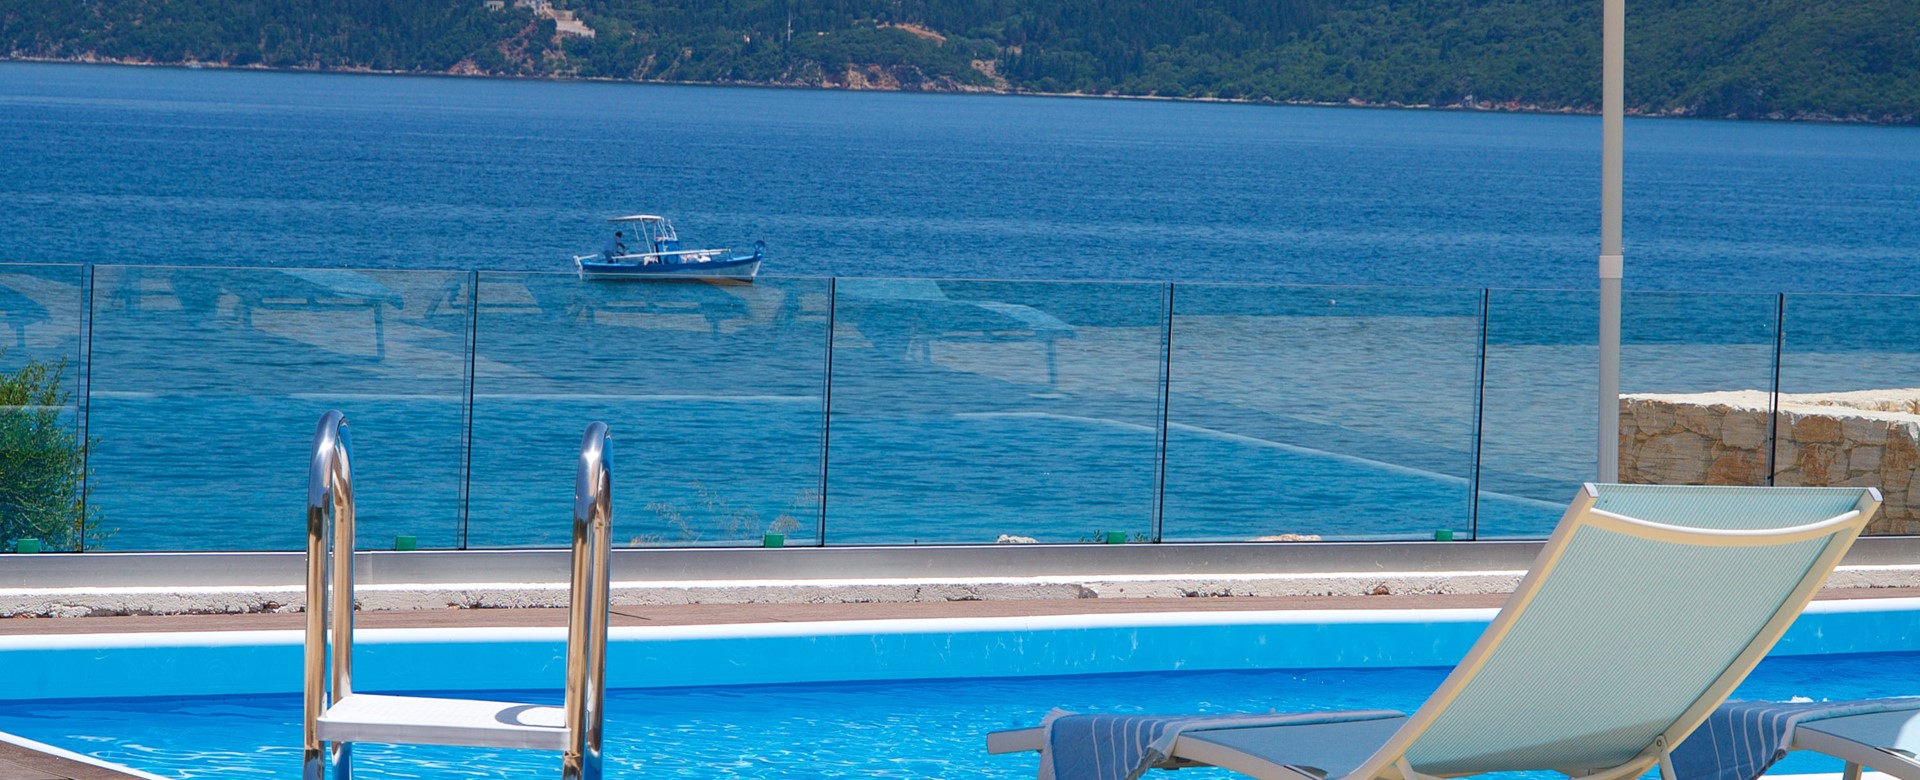 Watch the boats come and go from the pool side at Villa Frydi, Karavomilos, Kefalonia, Greek Islands